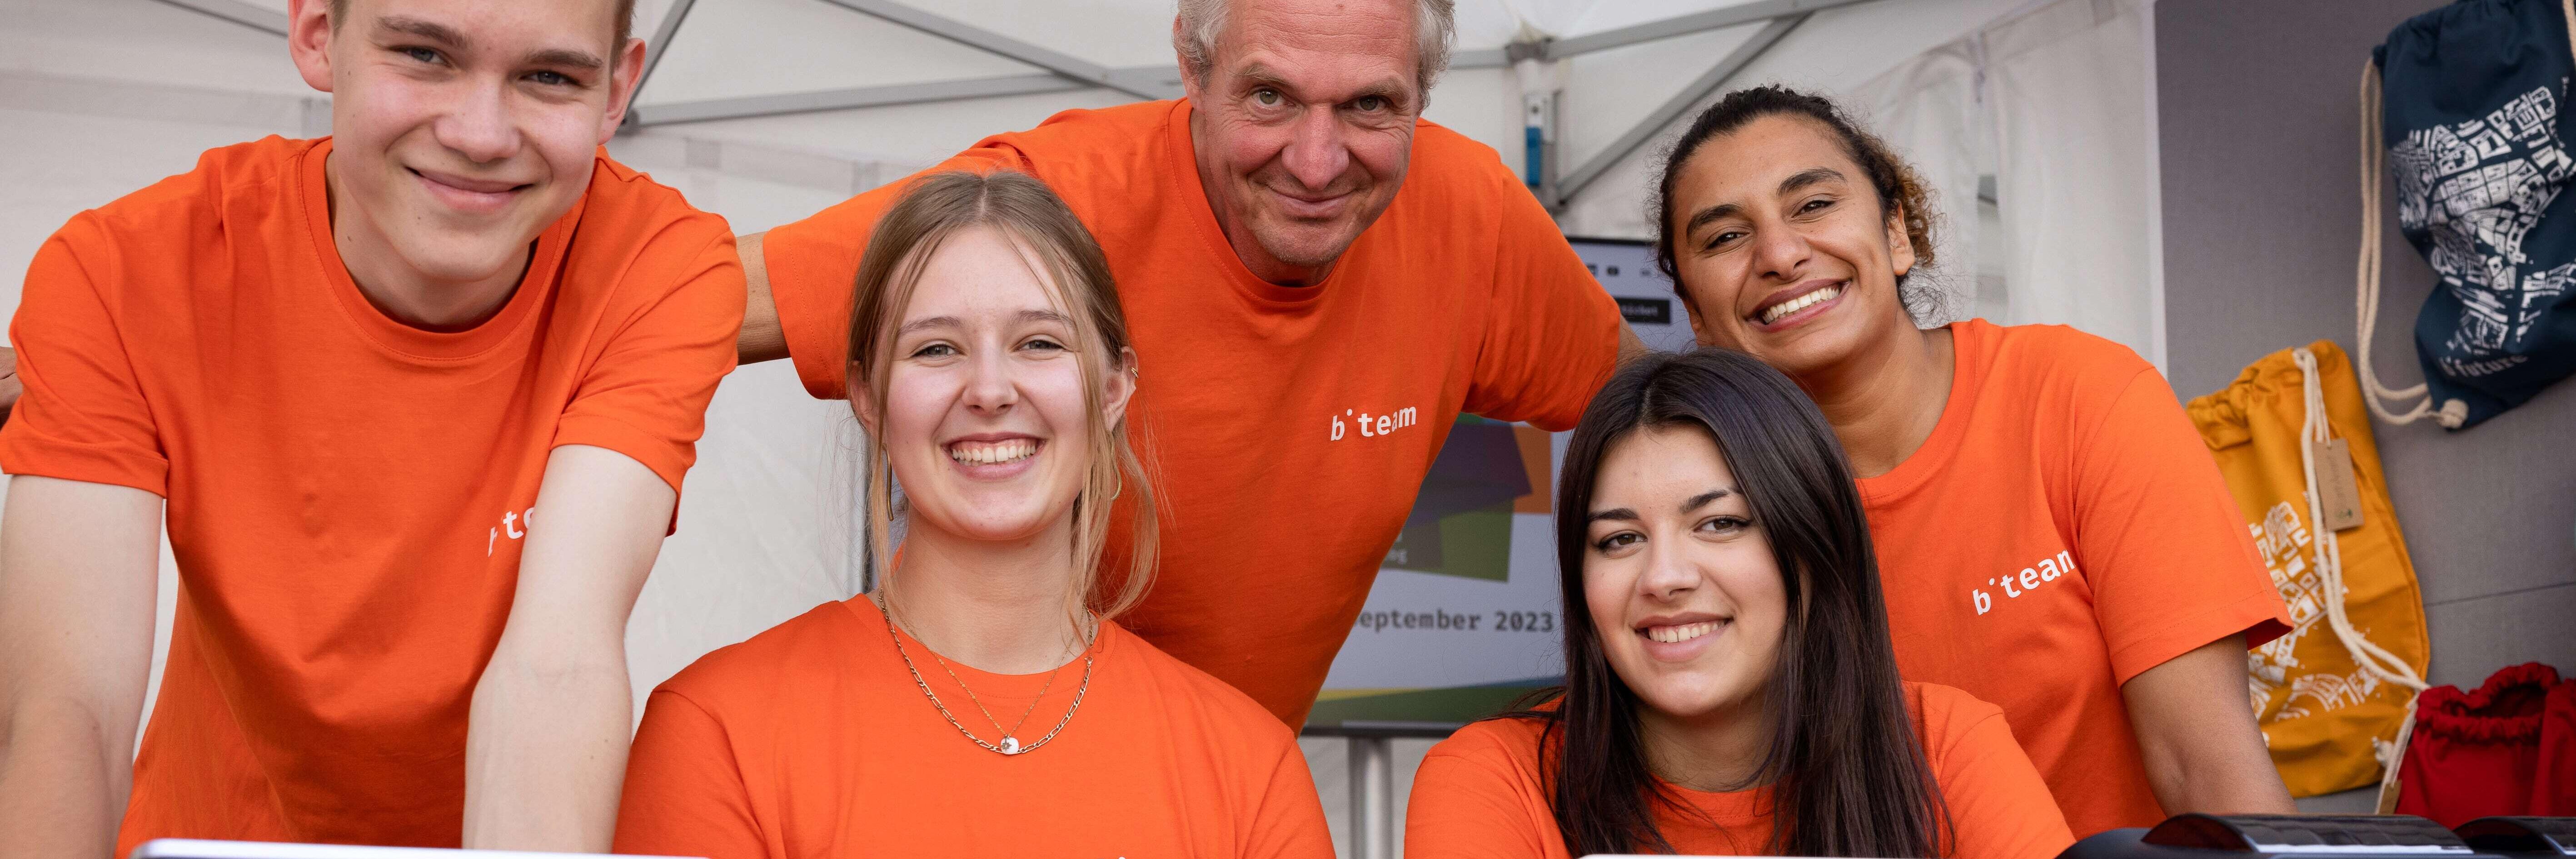 Five team members of the b-future team, dressed in orange, stand at a festival booth, smiling warmly at the camera. They are wearing orange T-shirts with the inscription "b-team."